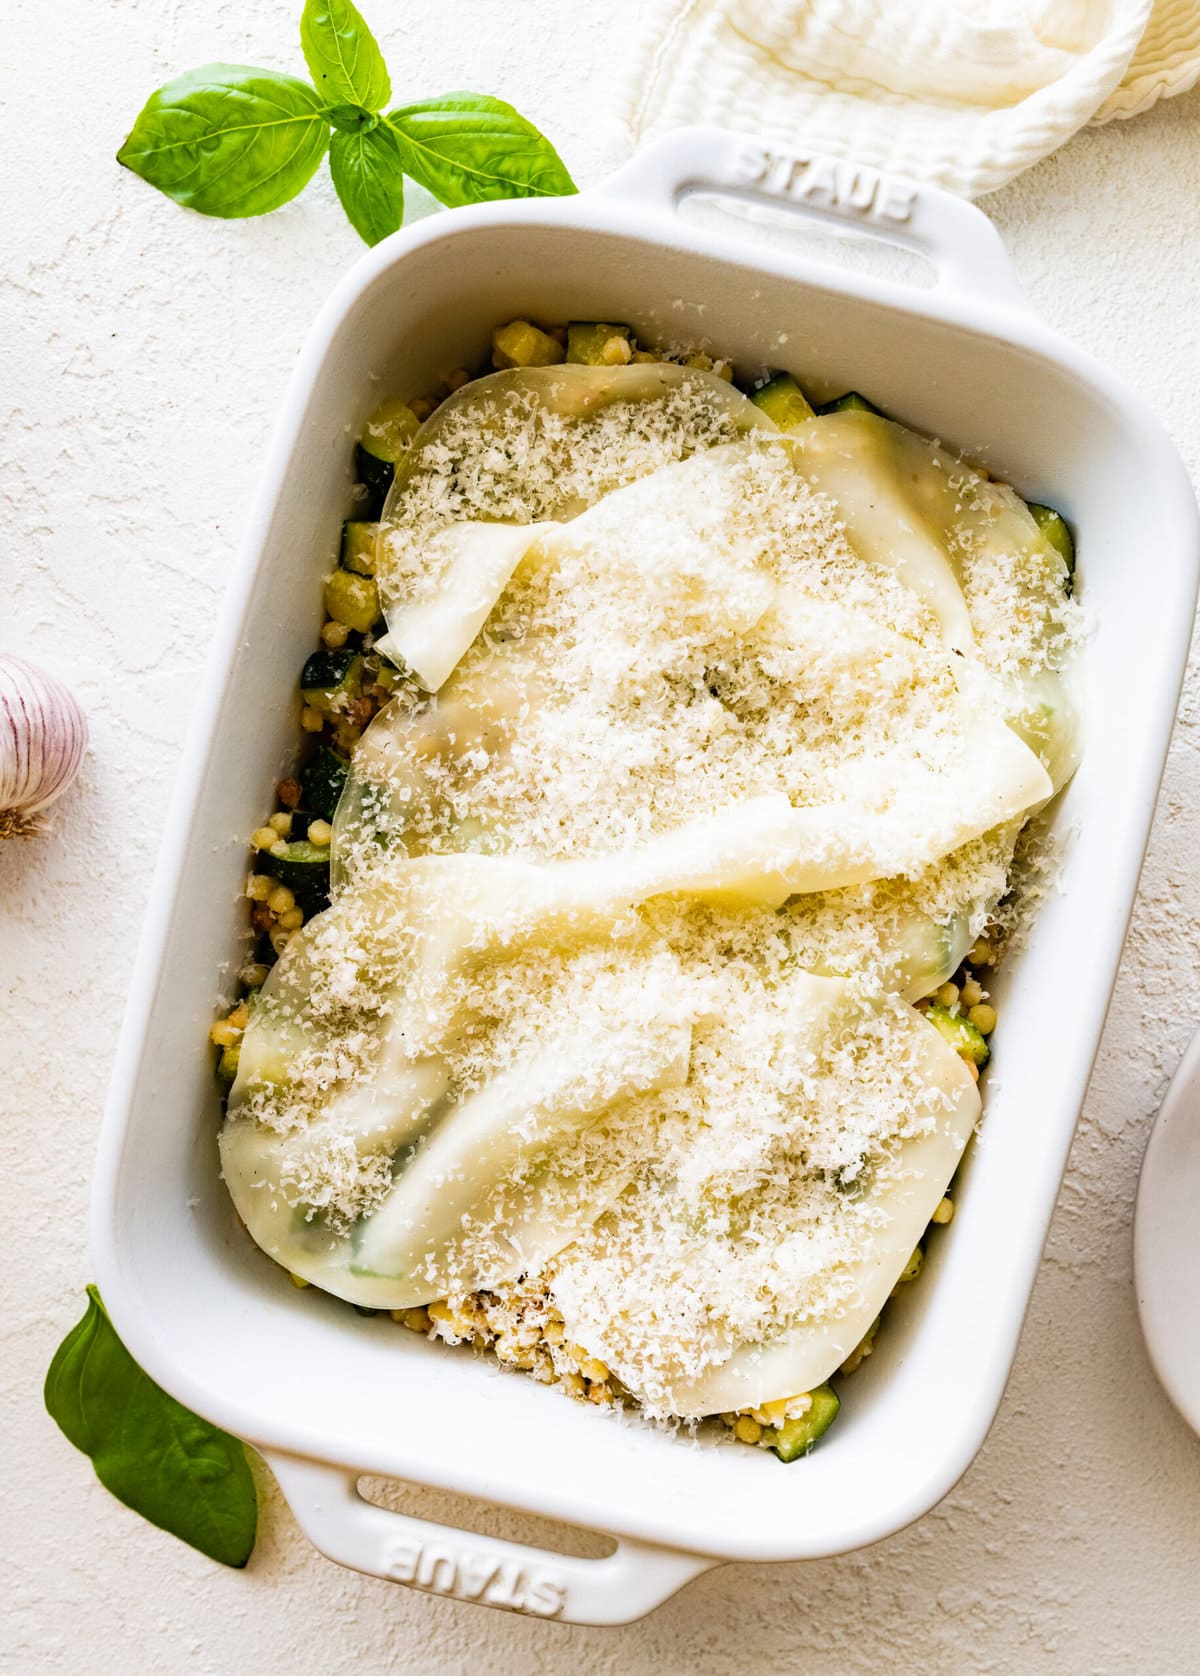 Step by step instructions Fregola Sarda Pasta Recipe with Zucchini and Cheese- place finished pasta and zucchini mixture in oven safe pan. Layer with cheese.